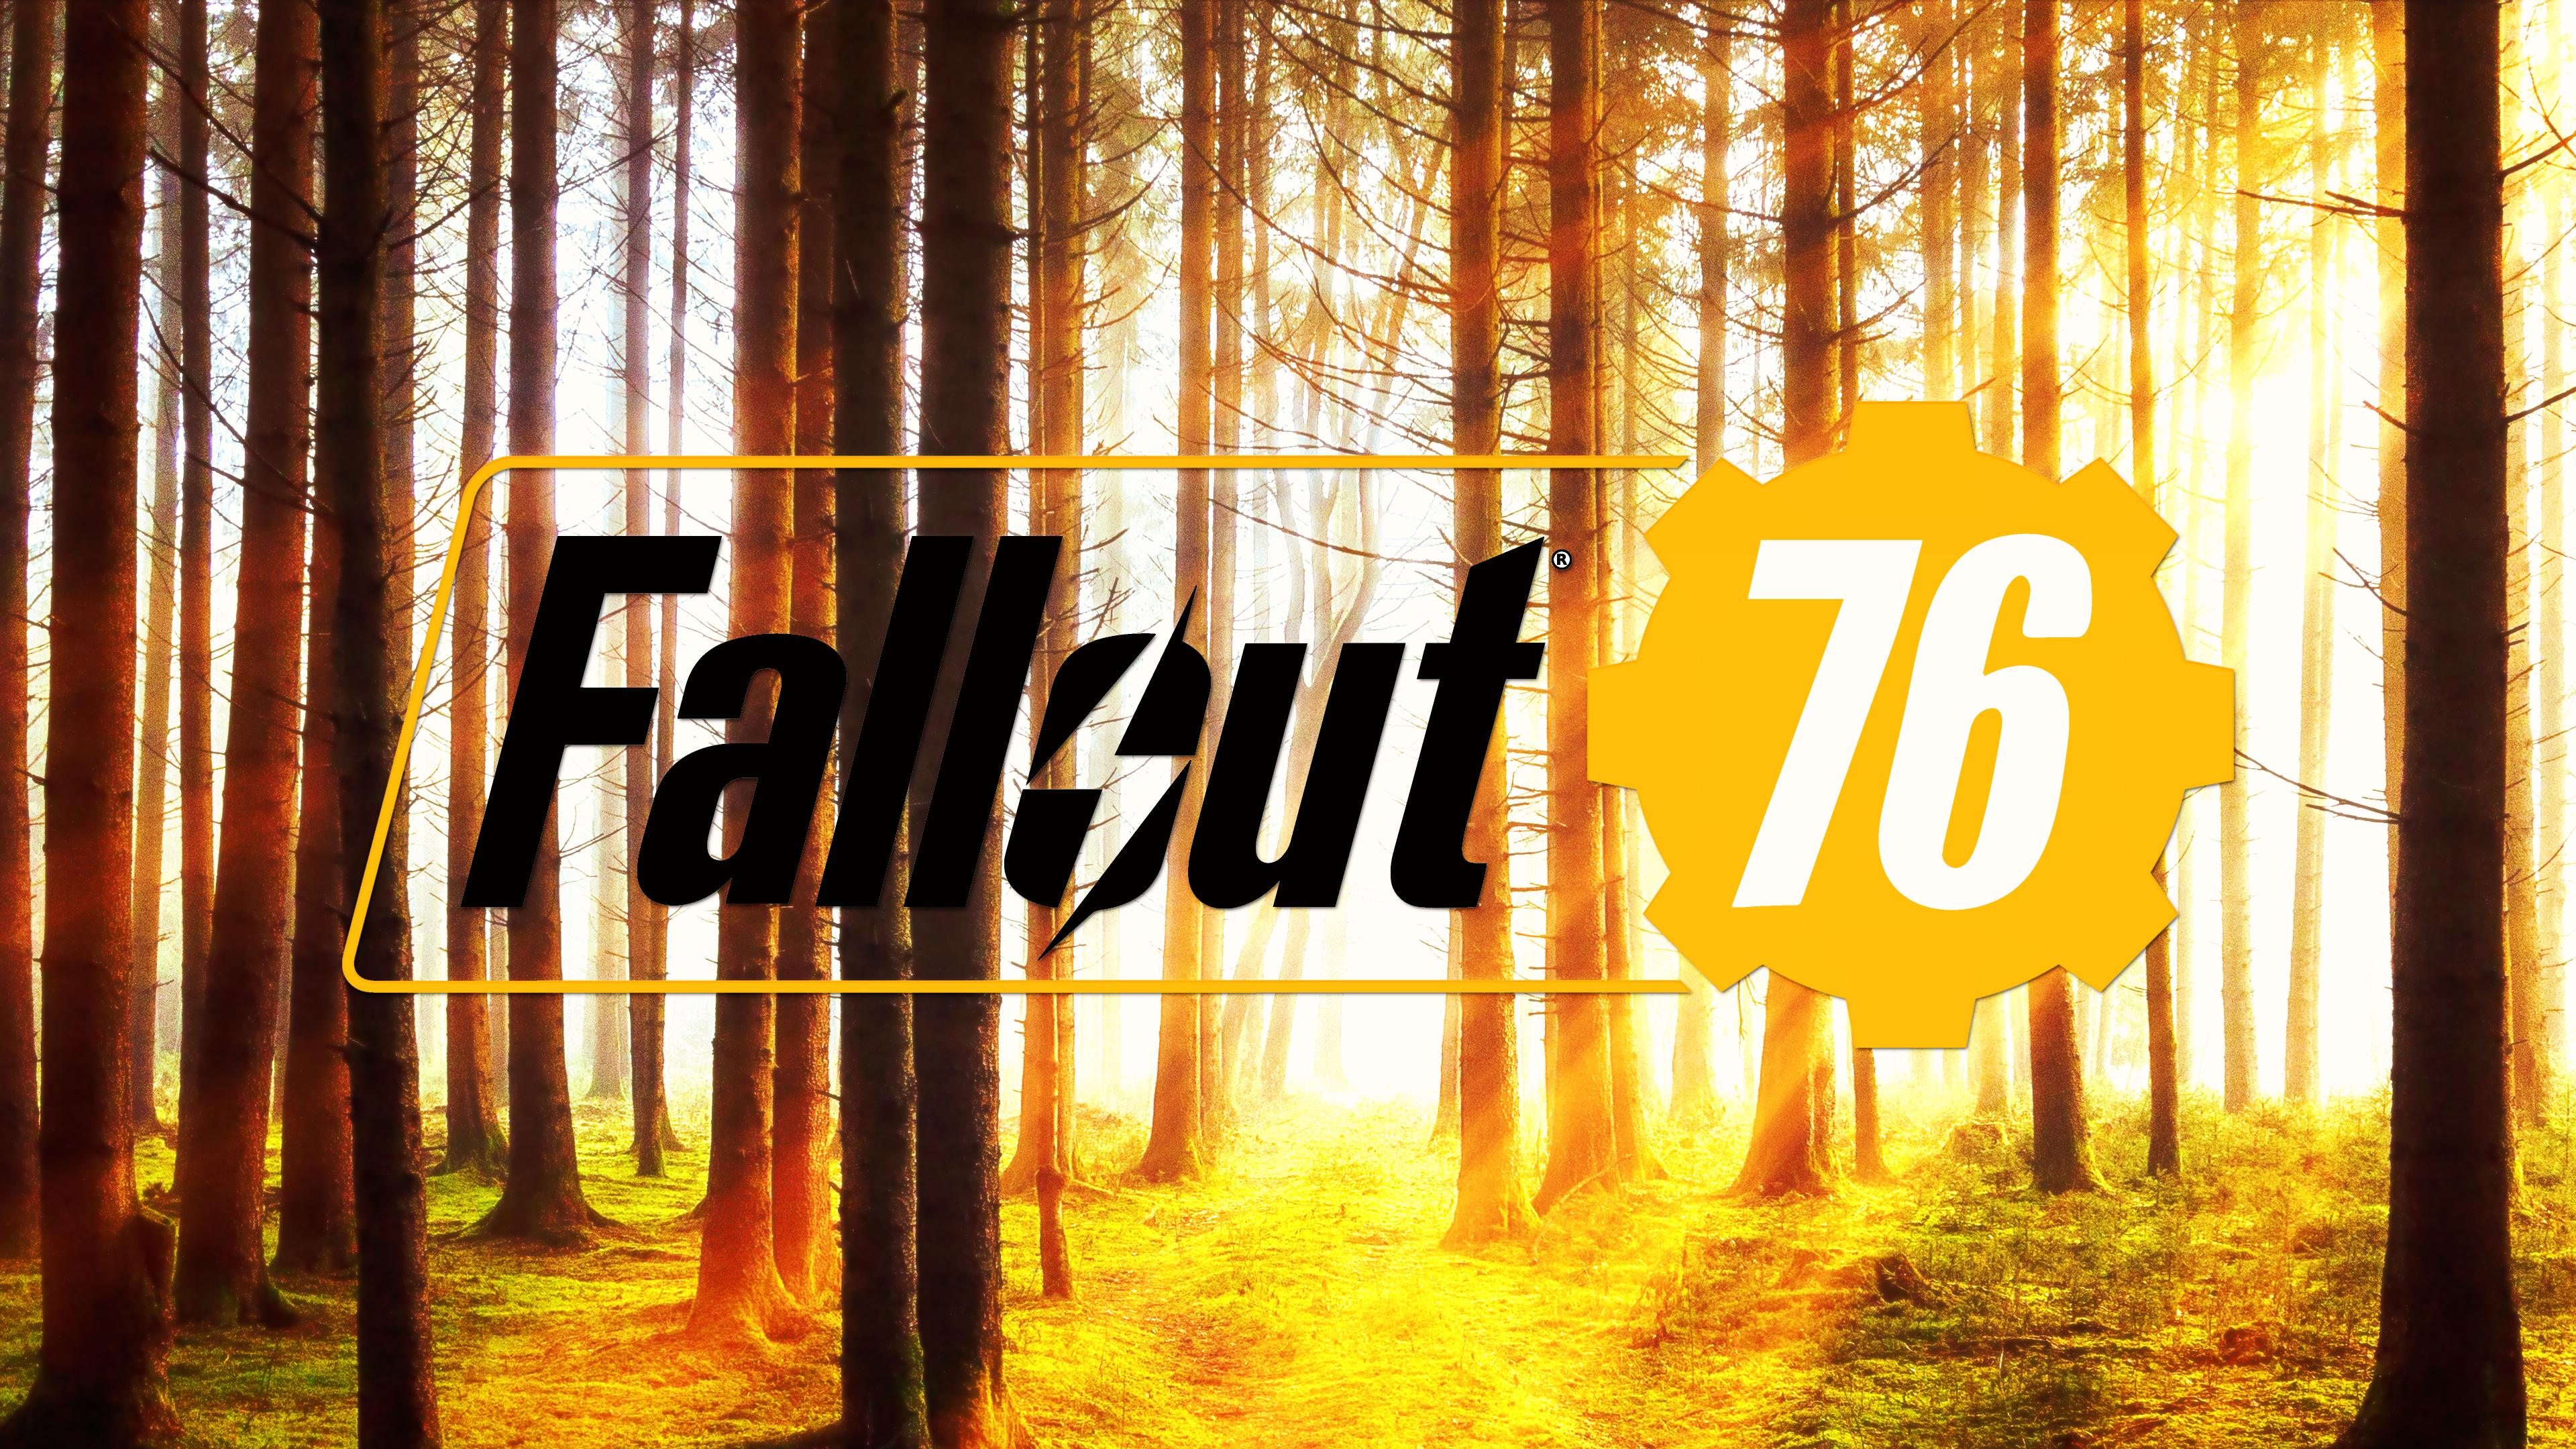 Fallout Chromebook Wallpaper For